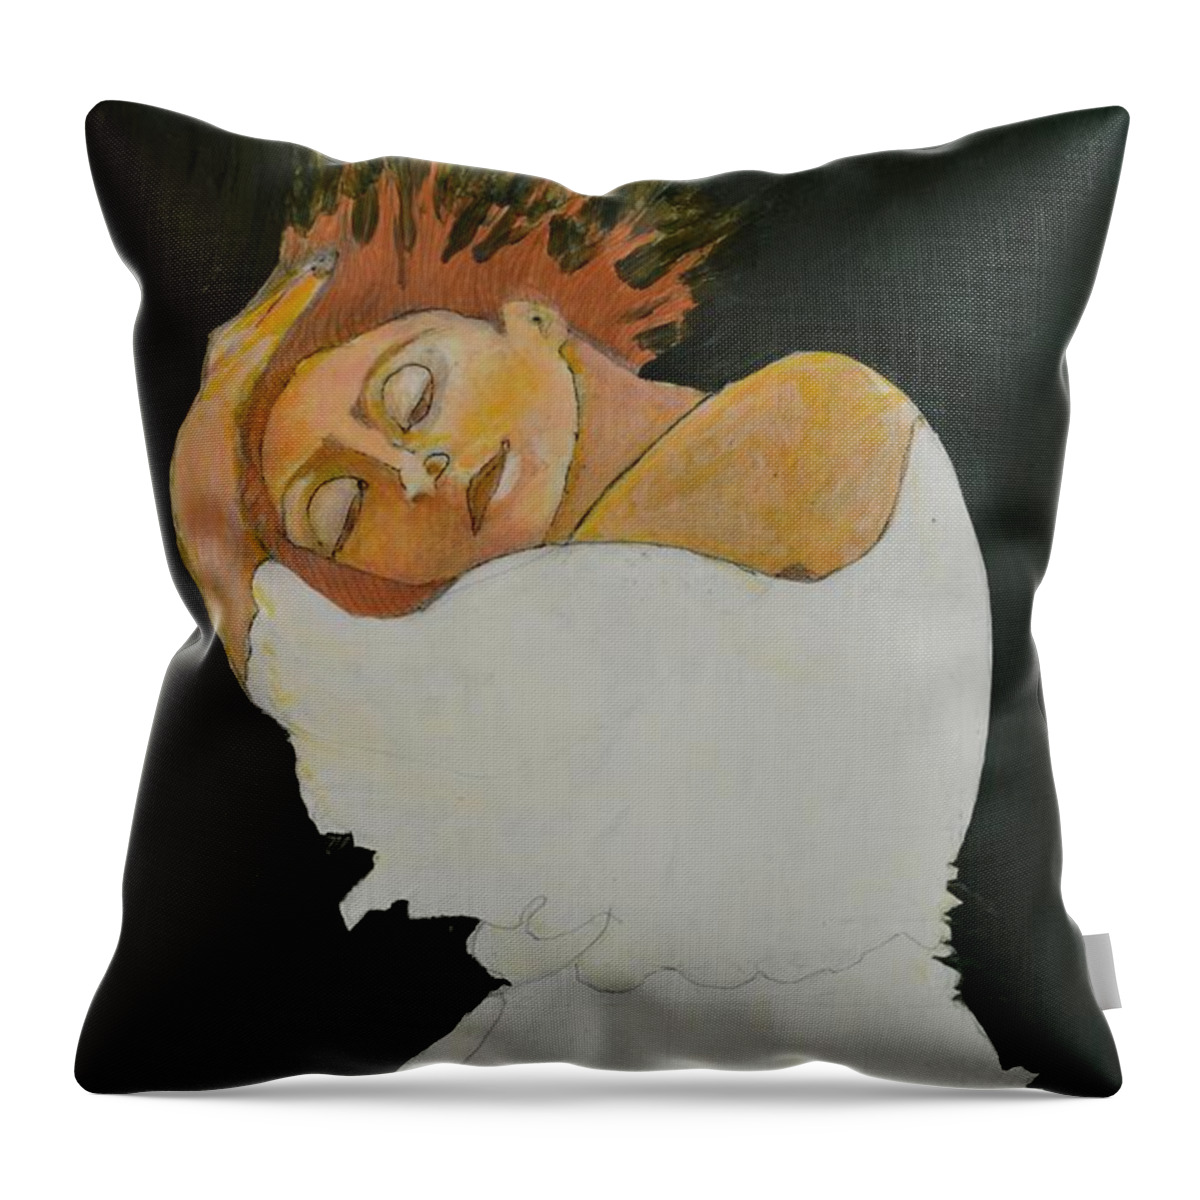 Woman Throw Pillow featuring the painting Dreams by Diane montana Jansson